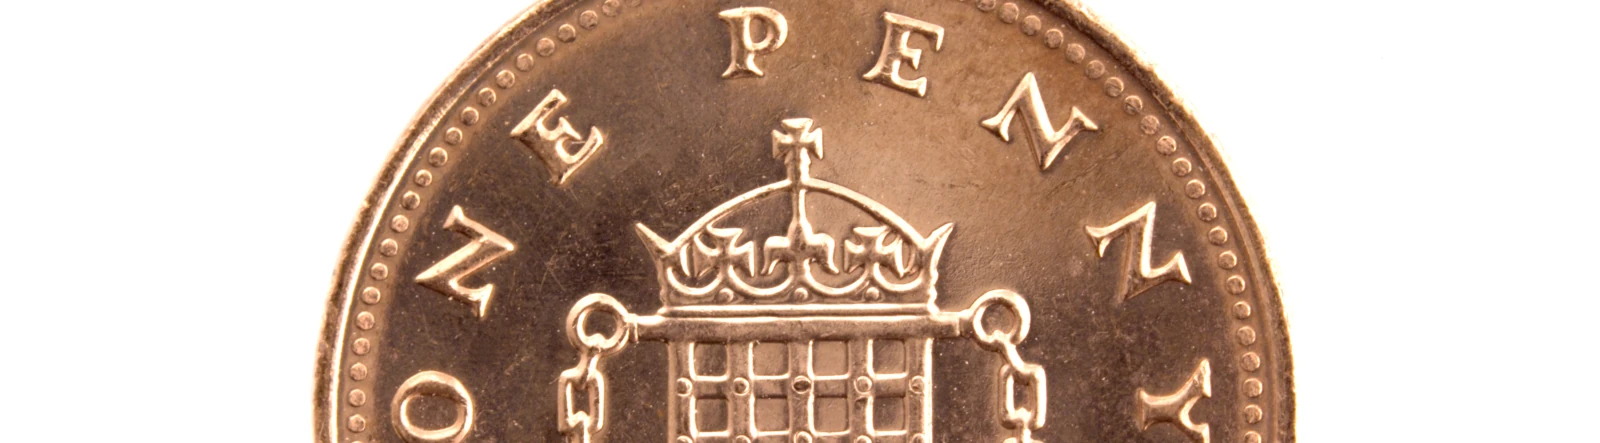 A close up of a British penny